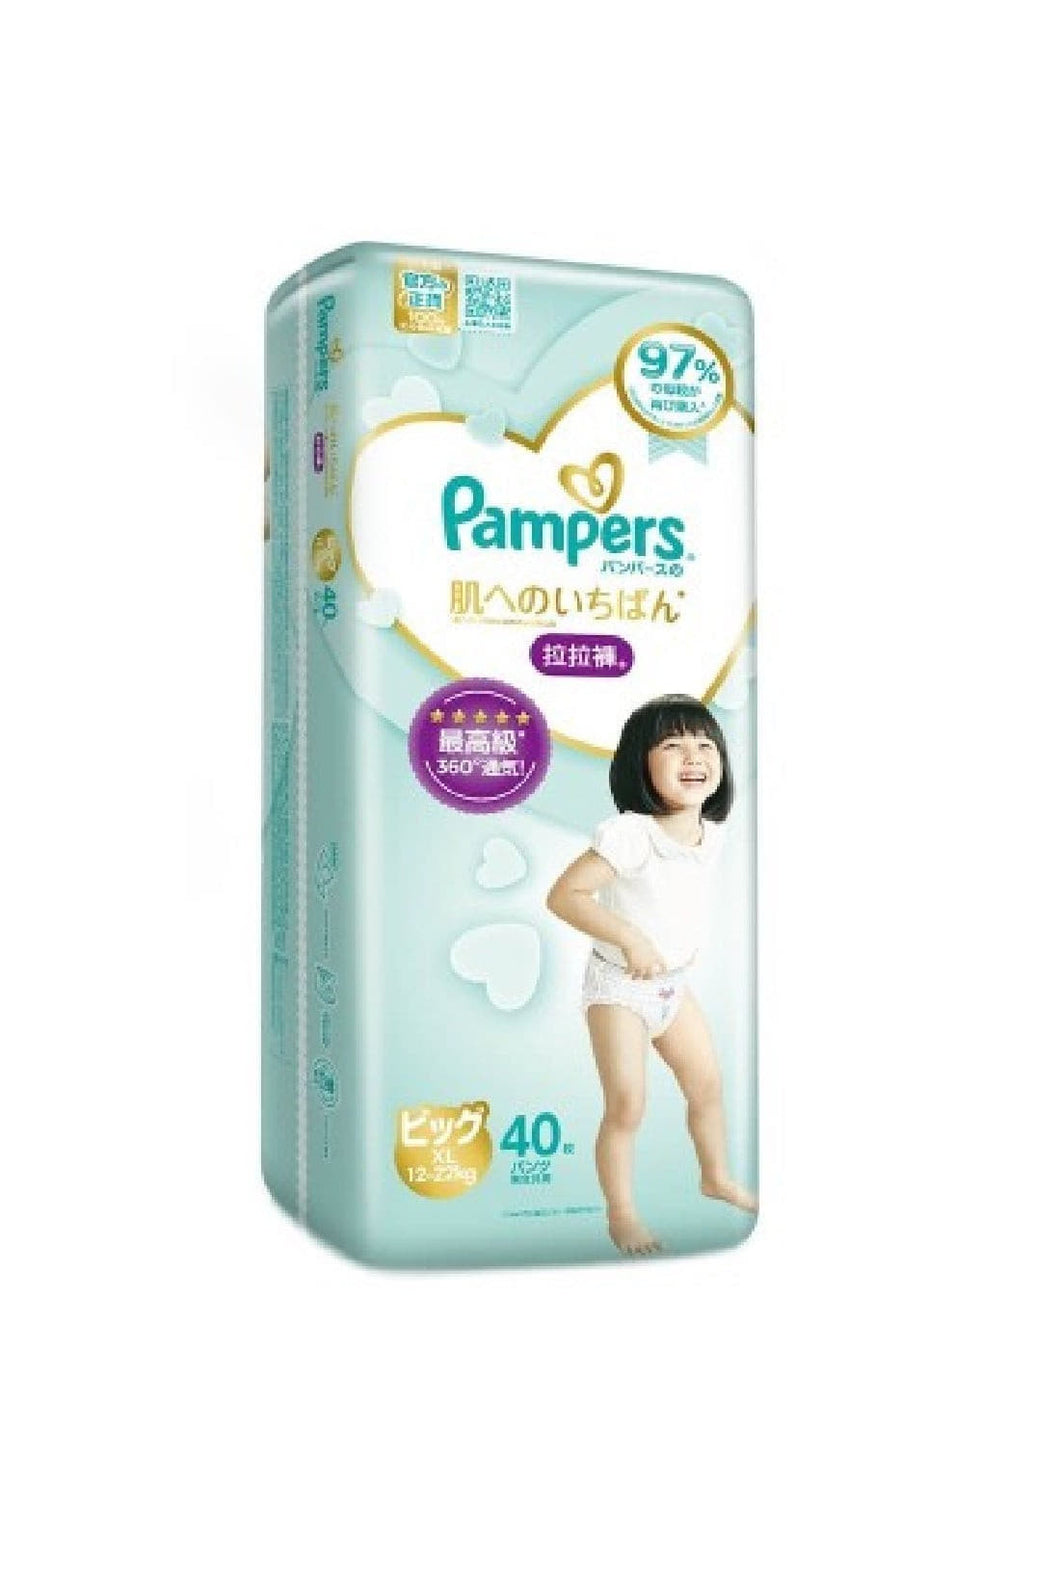 Buy Bumtum Baby Diaper Pants, XL Size, 108 Count, Double Layer Leakage  Protection Infused With Aloe Vera, Cottony Soft High Absorb Technology  (Pack of 2) Online at Low Prices in India - Amazon.in